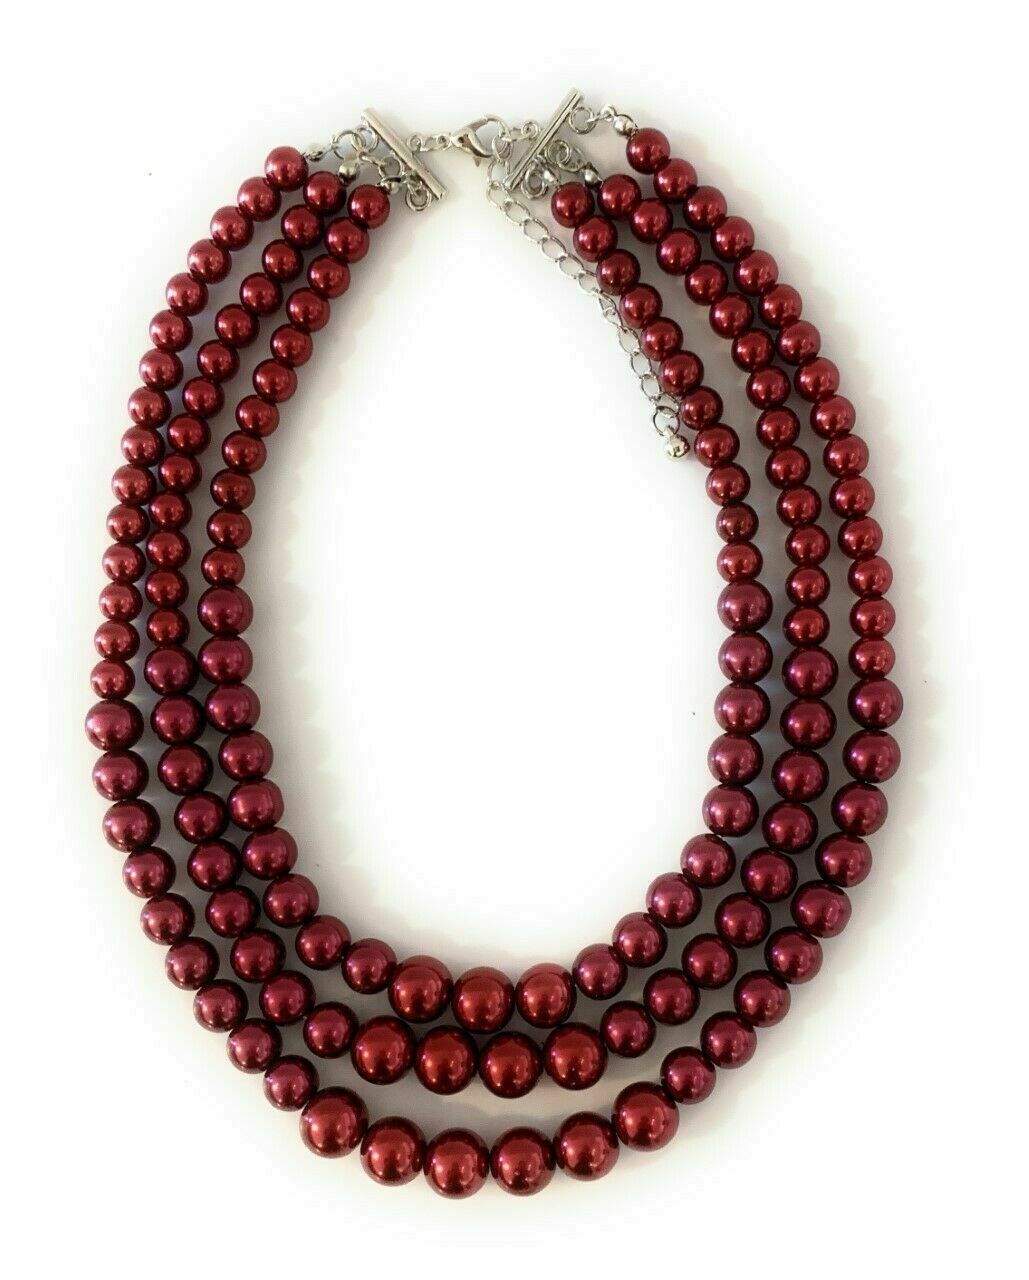 Burgundy Faux Pearls Necklace and Earrings Set